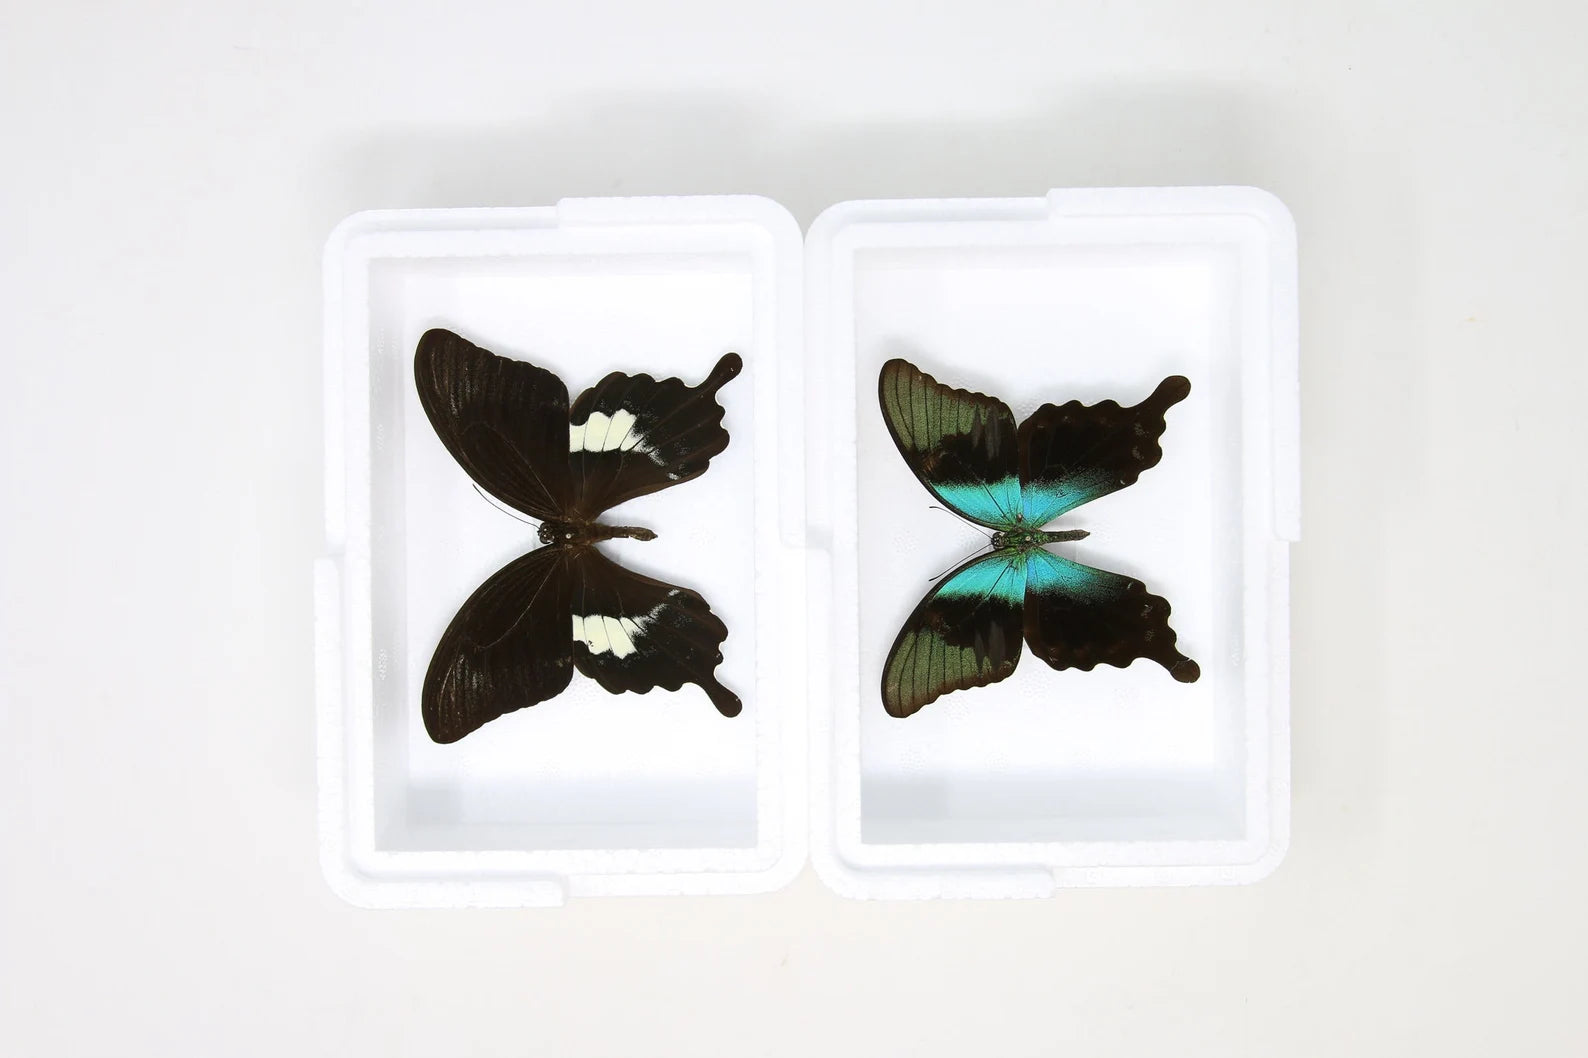 Pinned Tropical Butterflies, A1 Real Butterfly Pinned Set Specimens, Entomology Taxidermy (#BUT79)